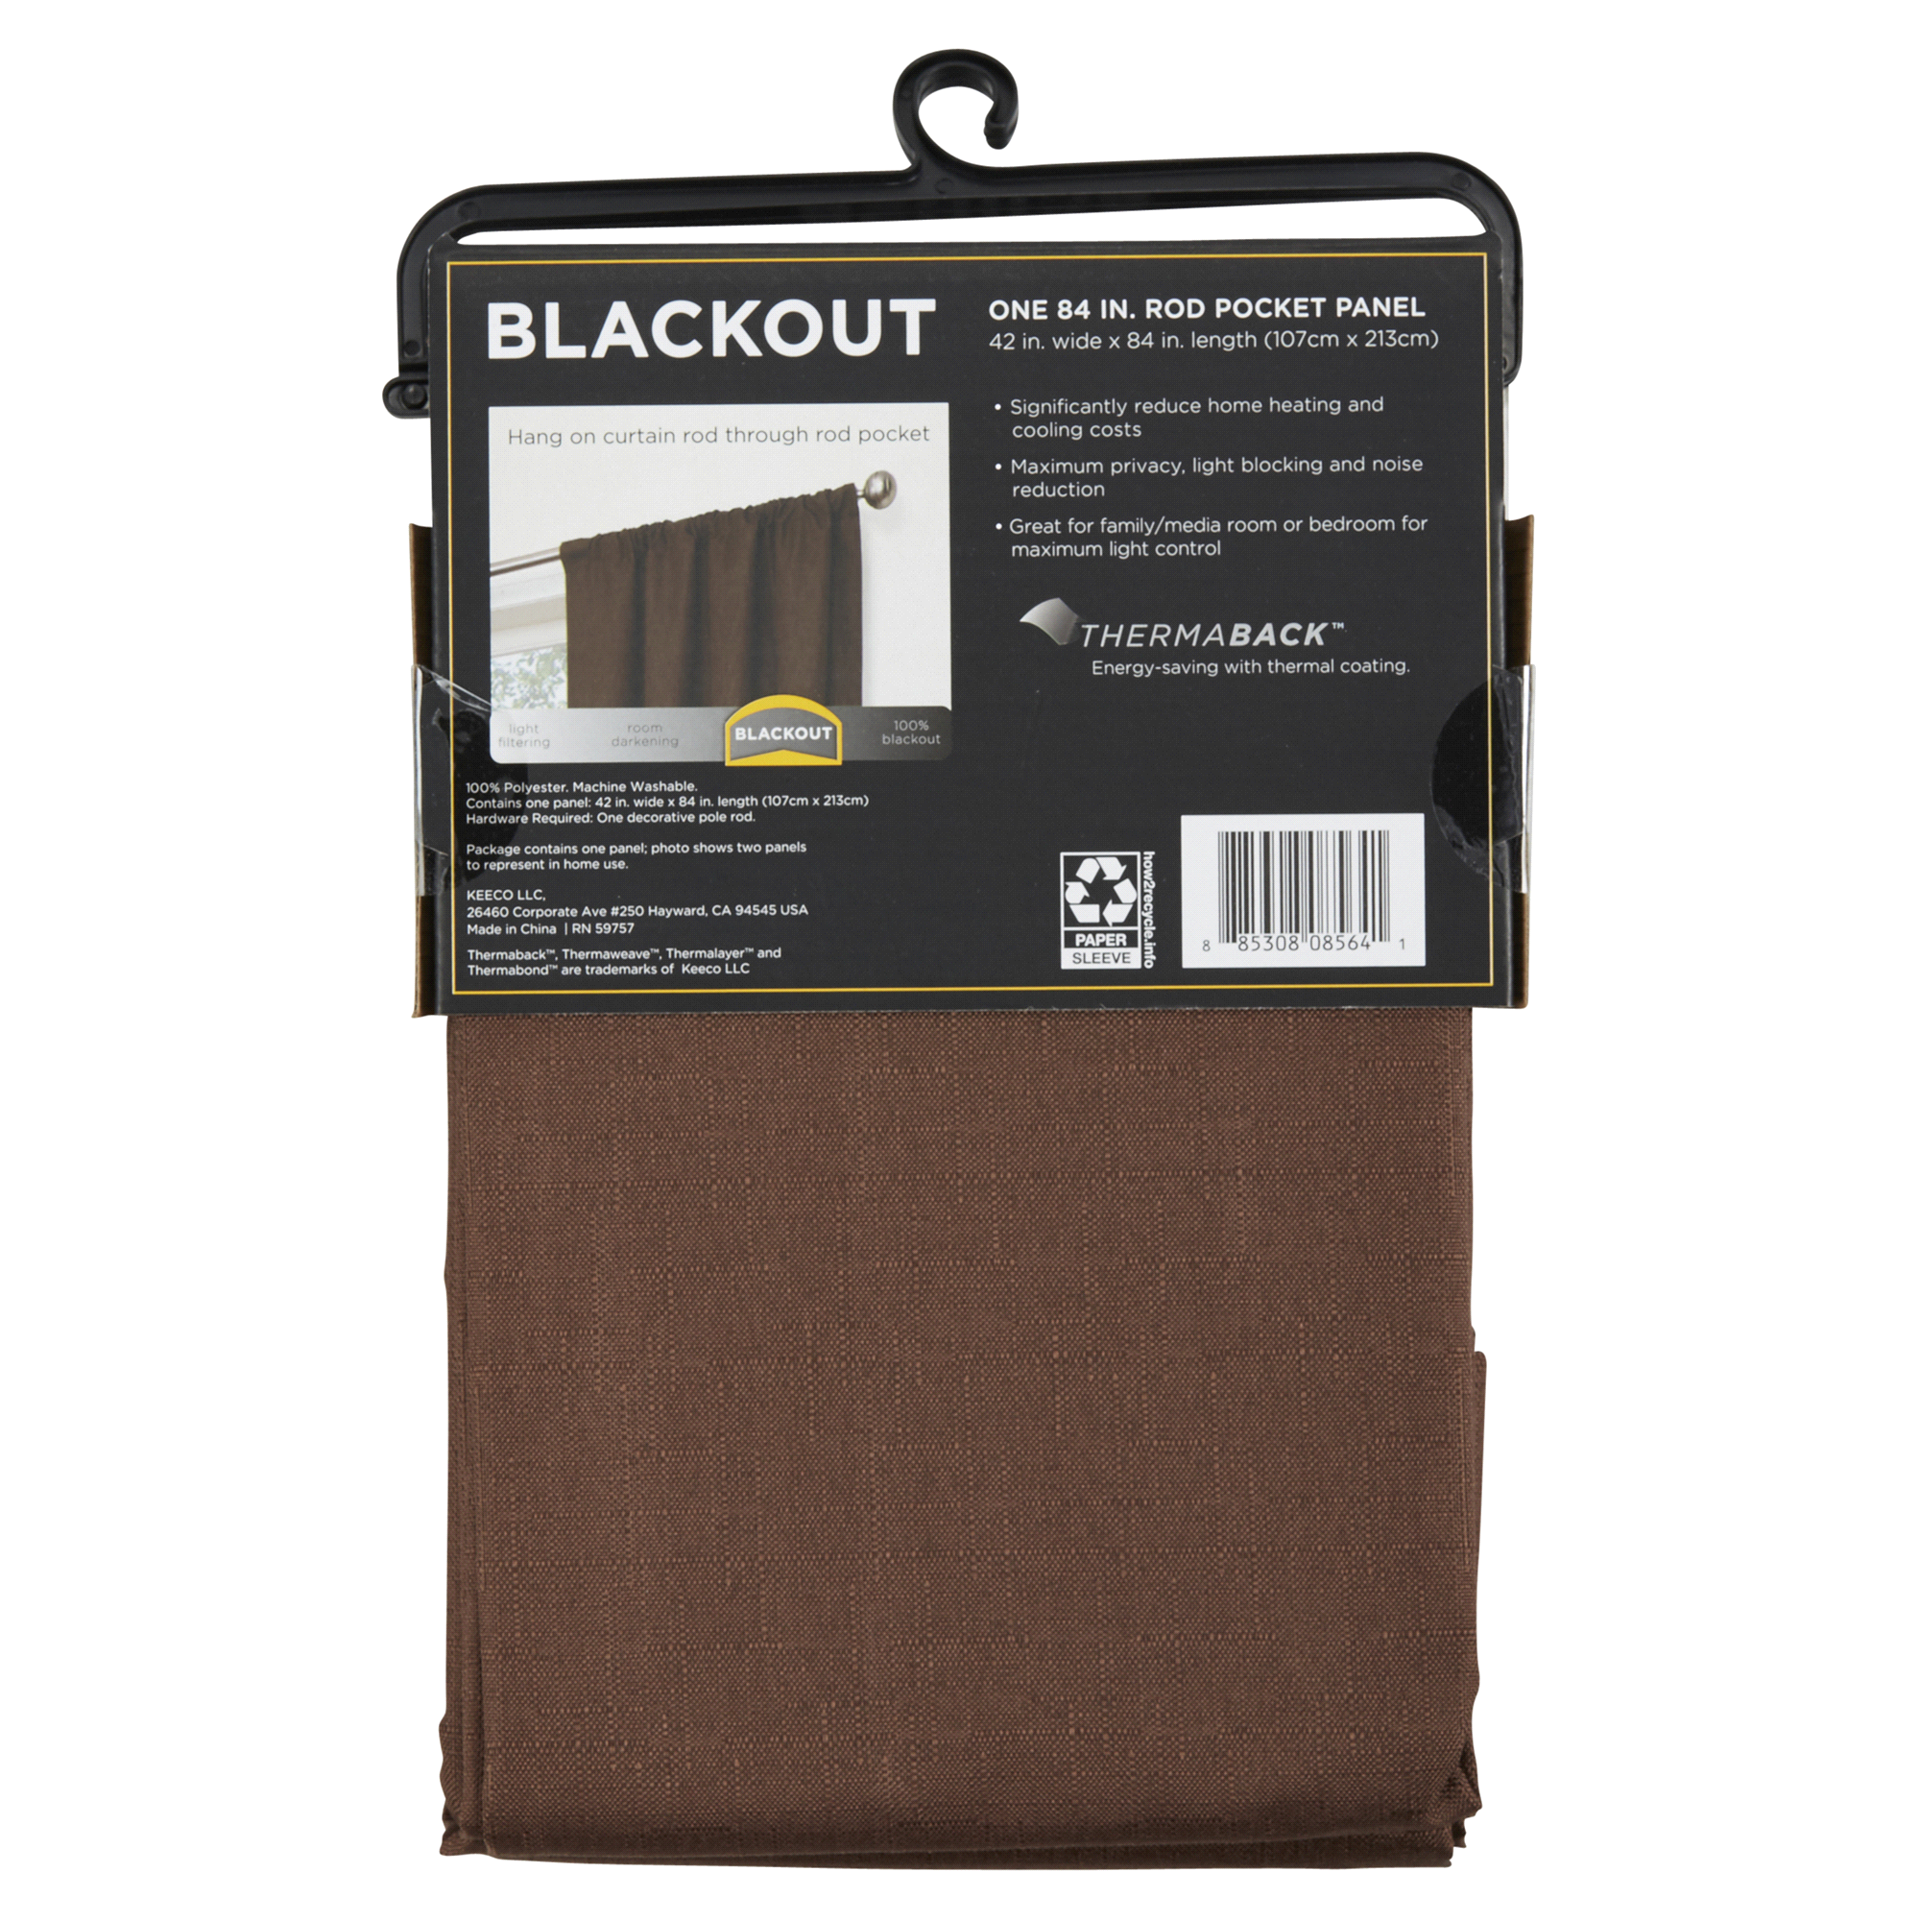 slide 9 of 29, Eclipse Kendall Blackout Window Curtain Panel - 84" - Chocolate, 1 ct